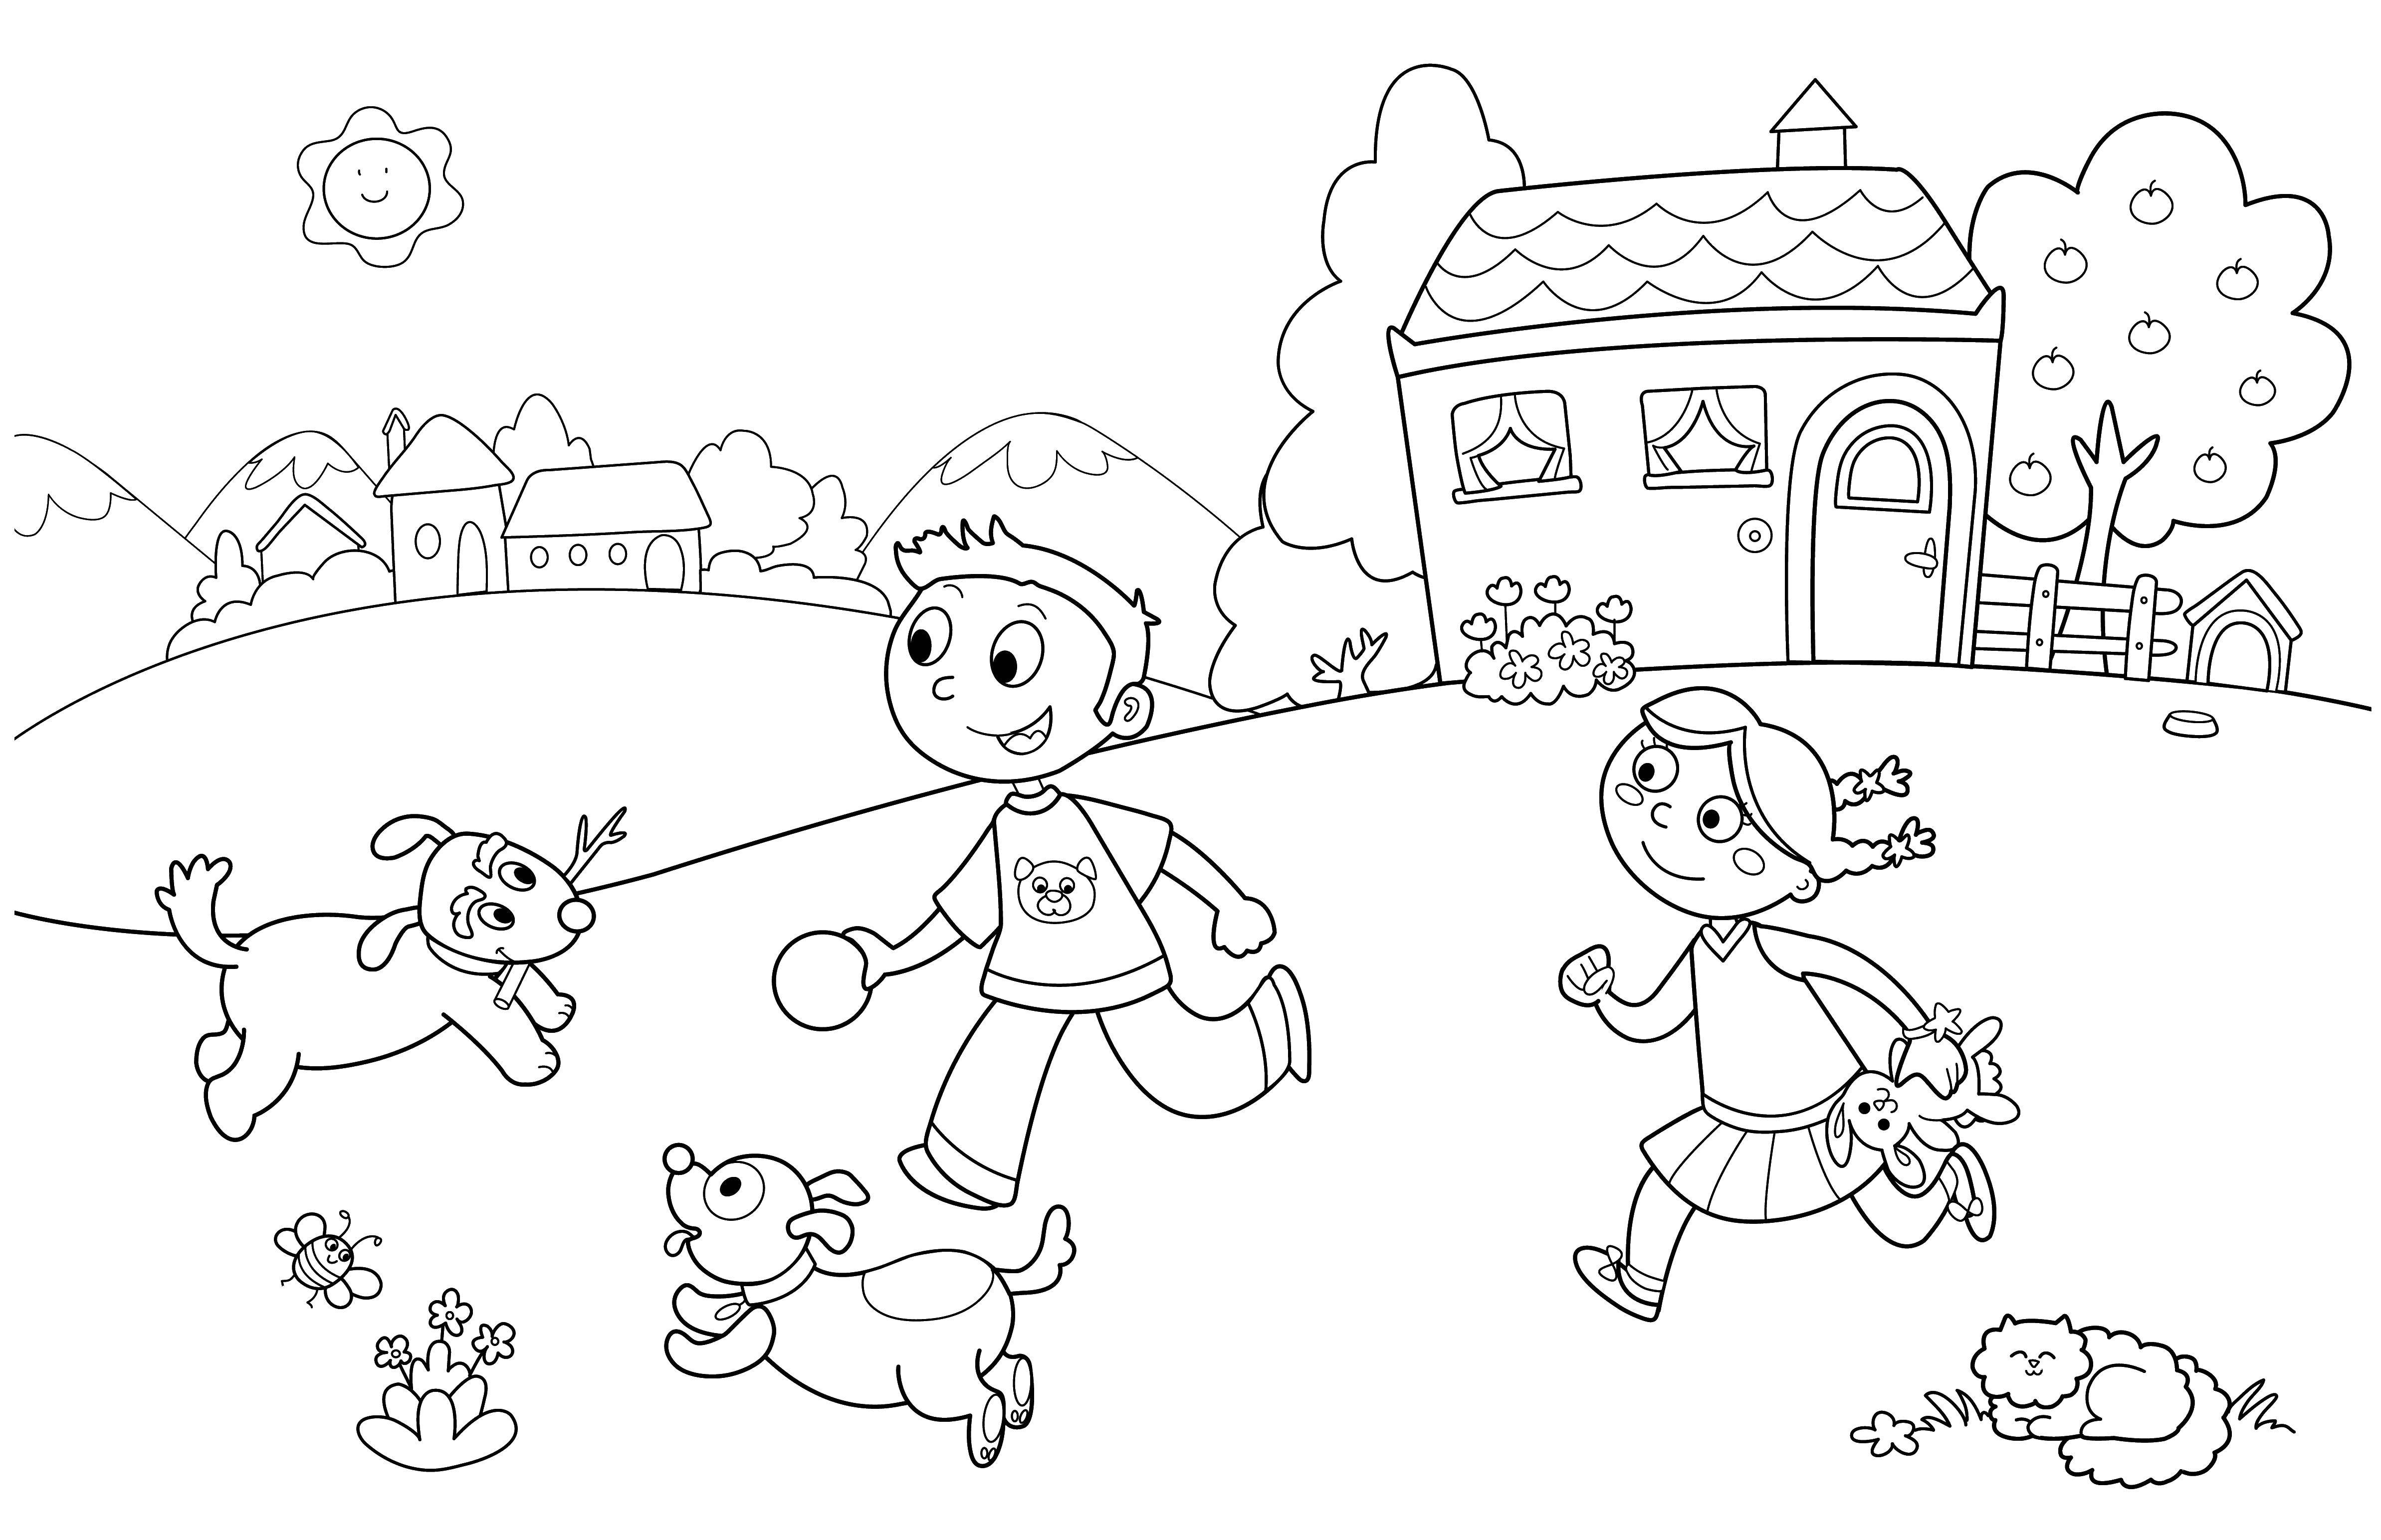 Coloring Stay. Category Summer fun. Tags:  leisure, children, dogs, summer.